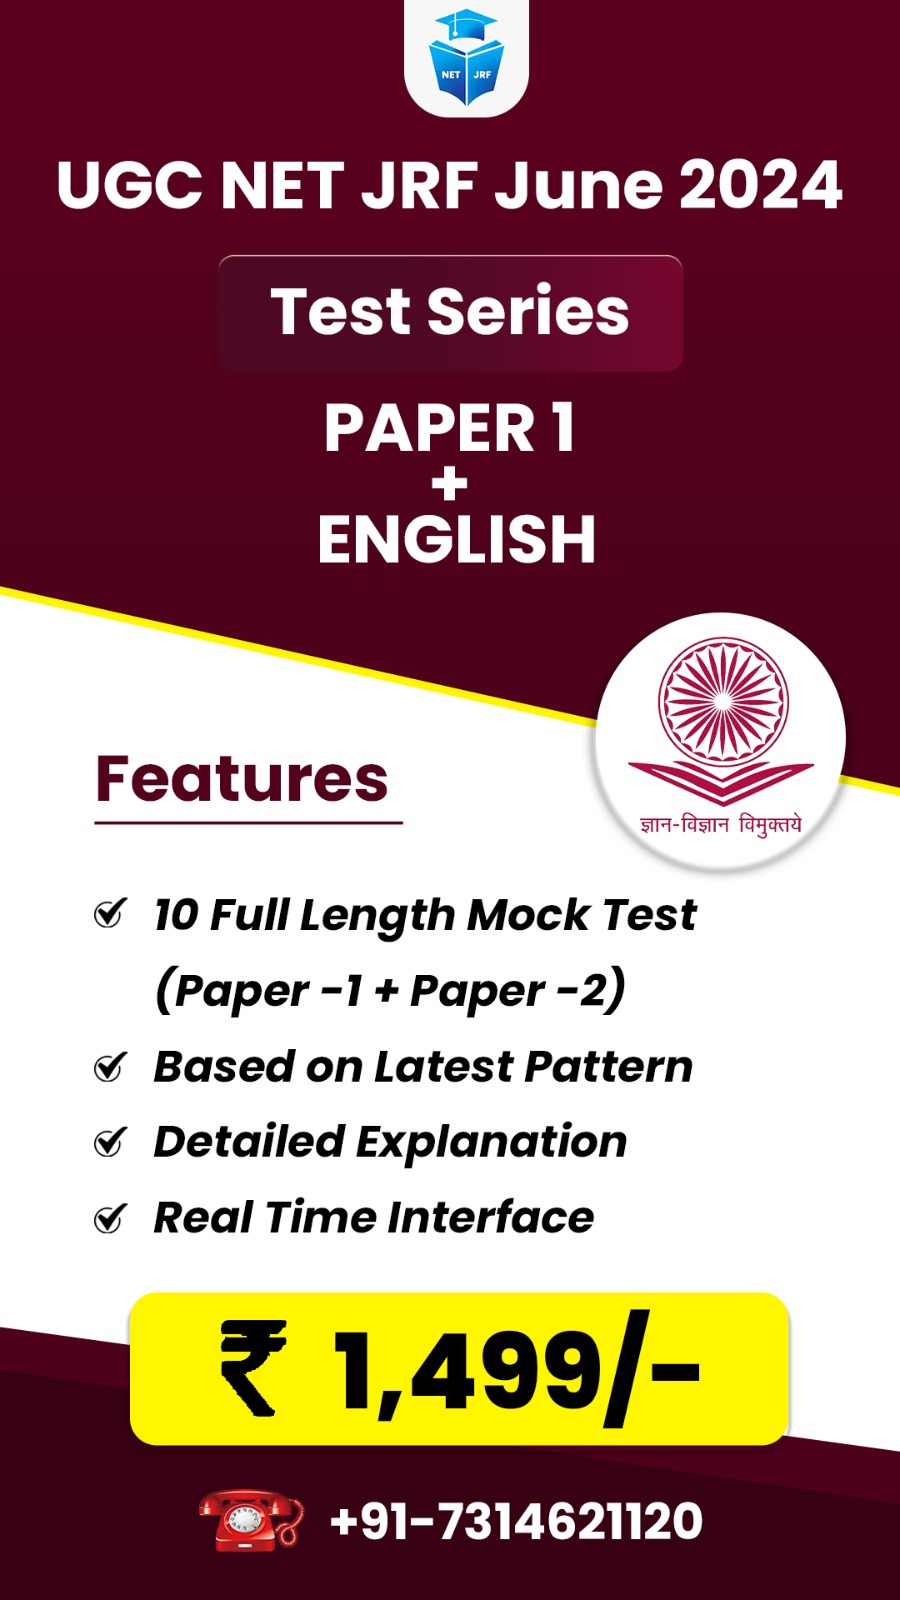 English (Paper 1 + Paper 2) Test Series for June 2024